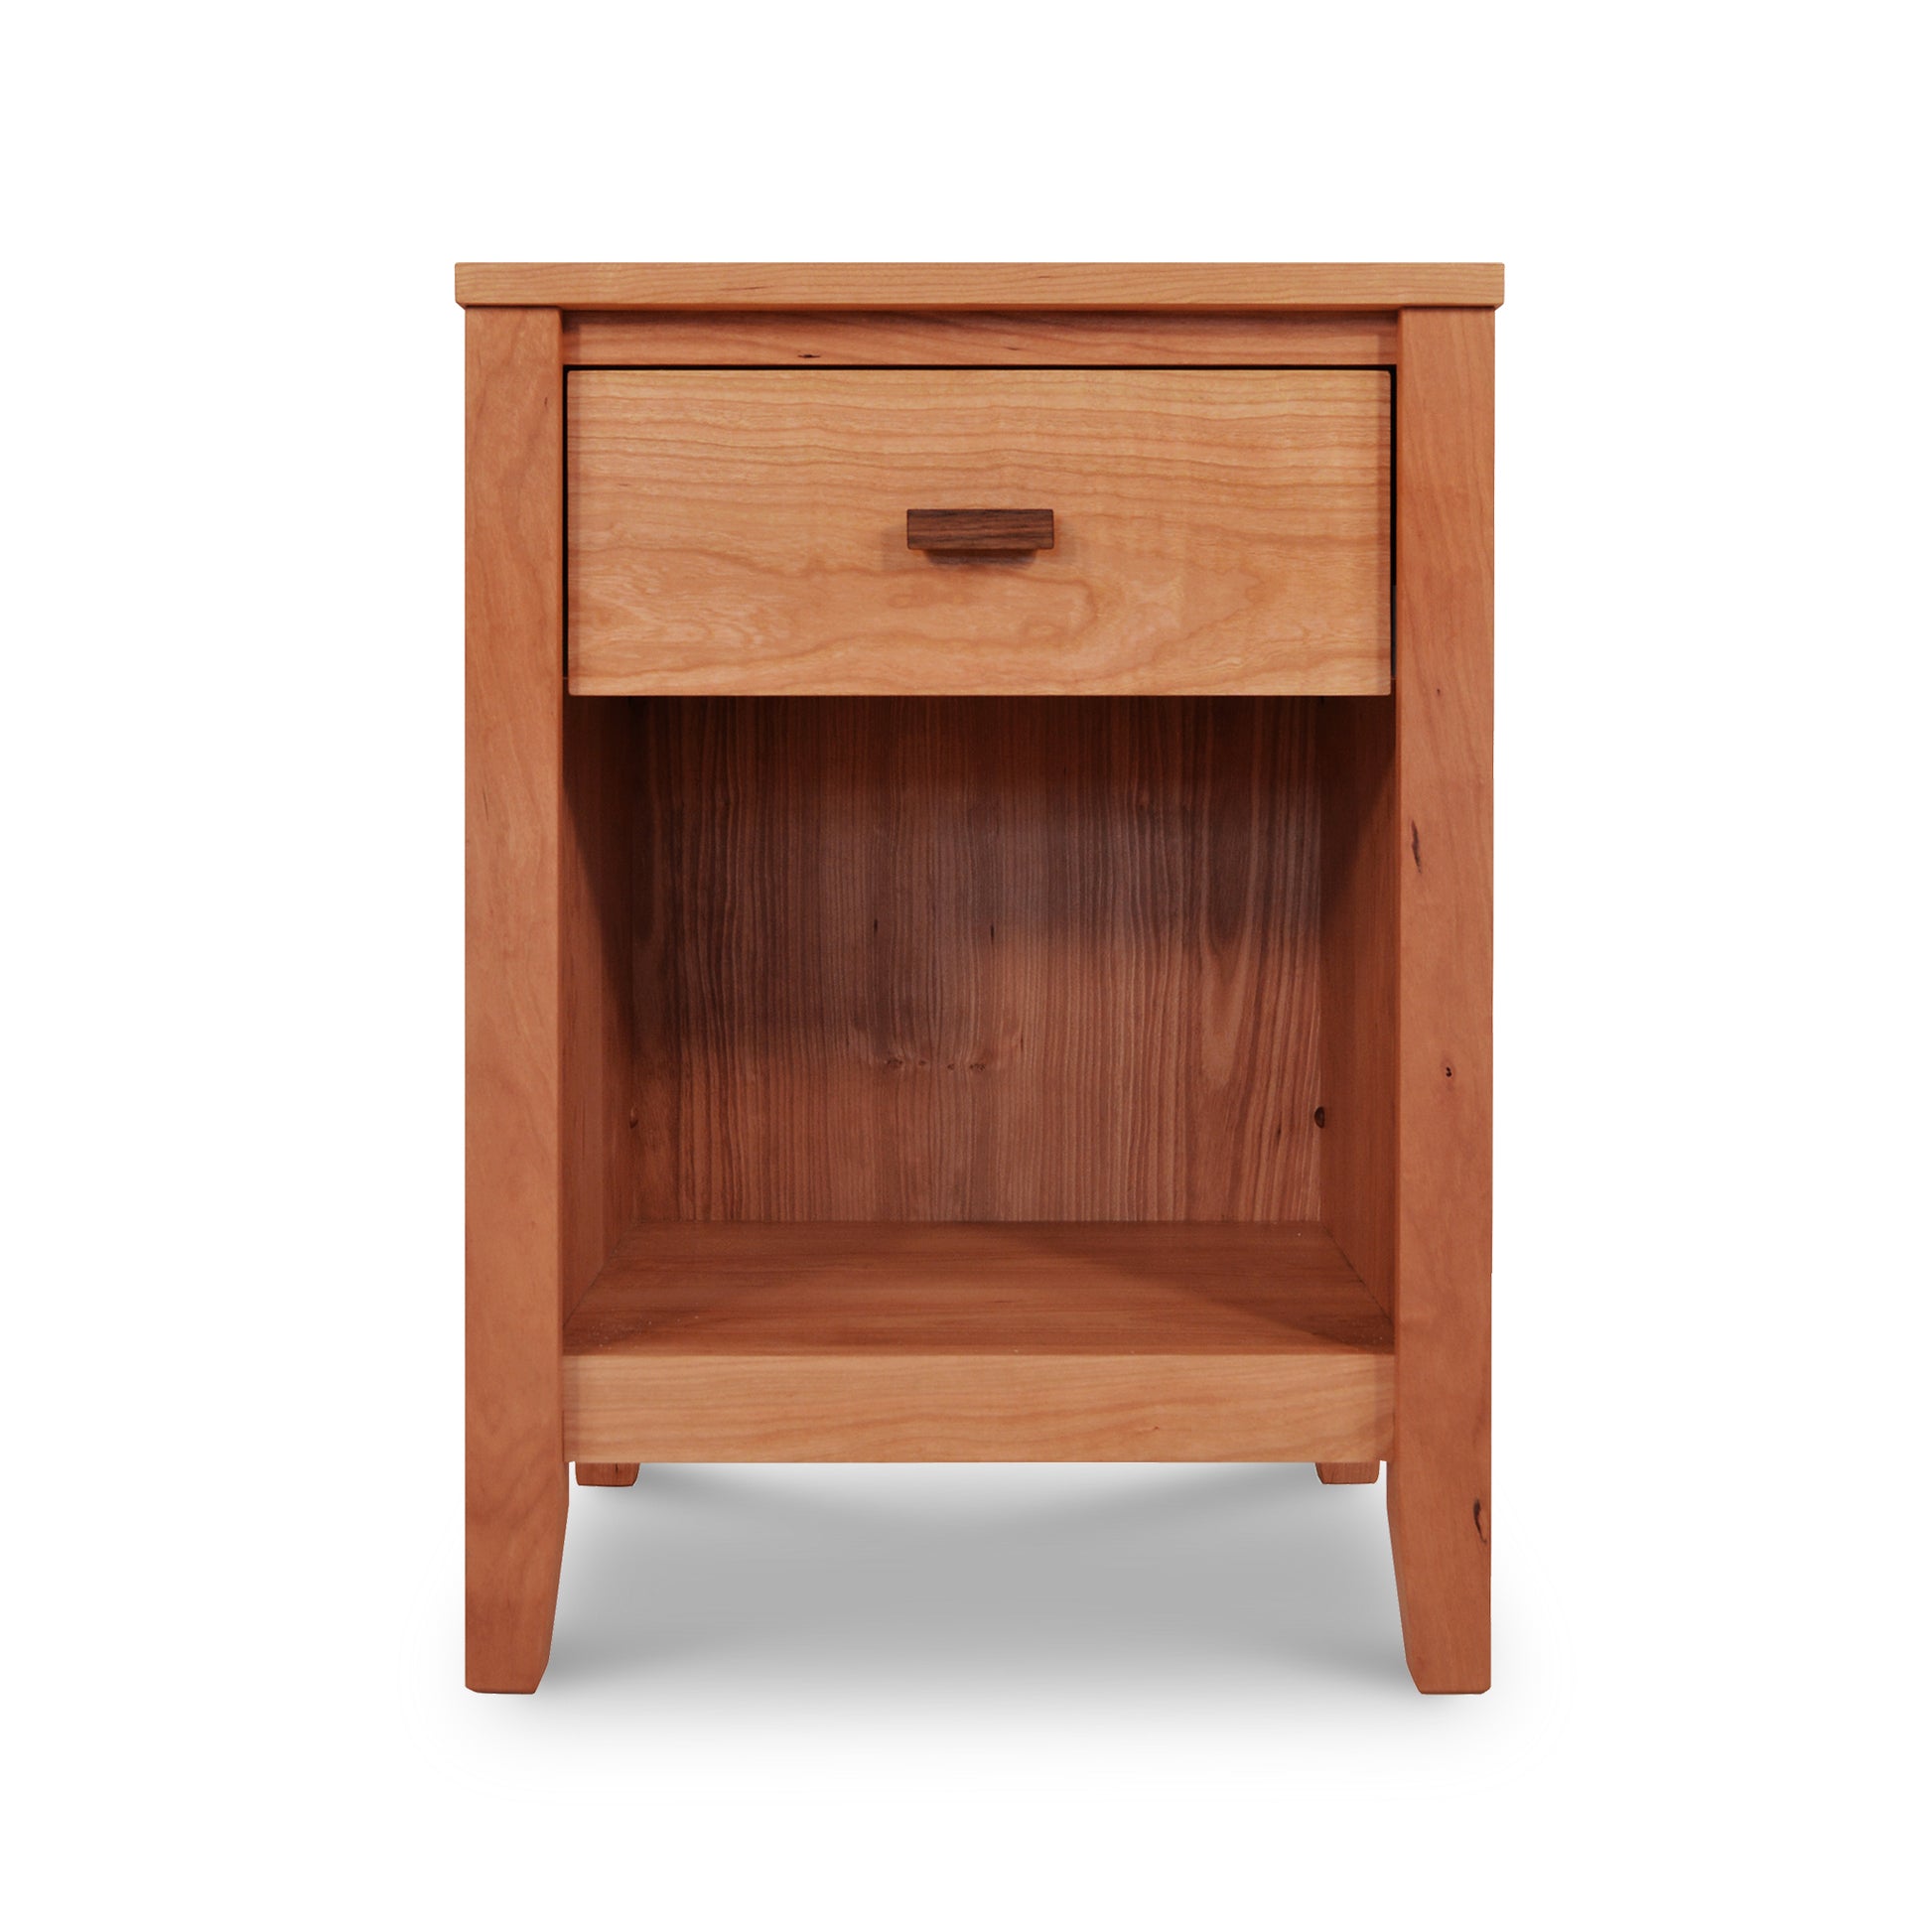 A Maple Corner Woodworks Andover Modern 1-Drawer Enclosed Shelf Nightstand with a single drawer and an open shelf below, photographed on a white background. The wood has a natural, warm tone and a smooth finish.